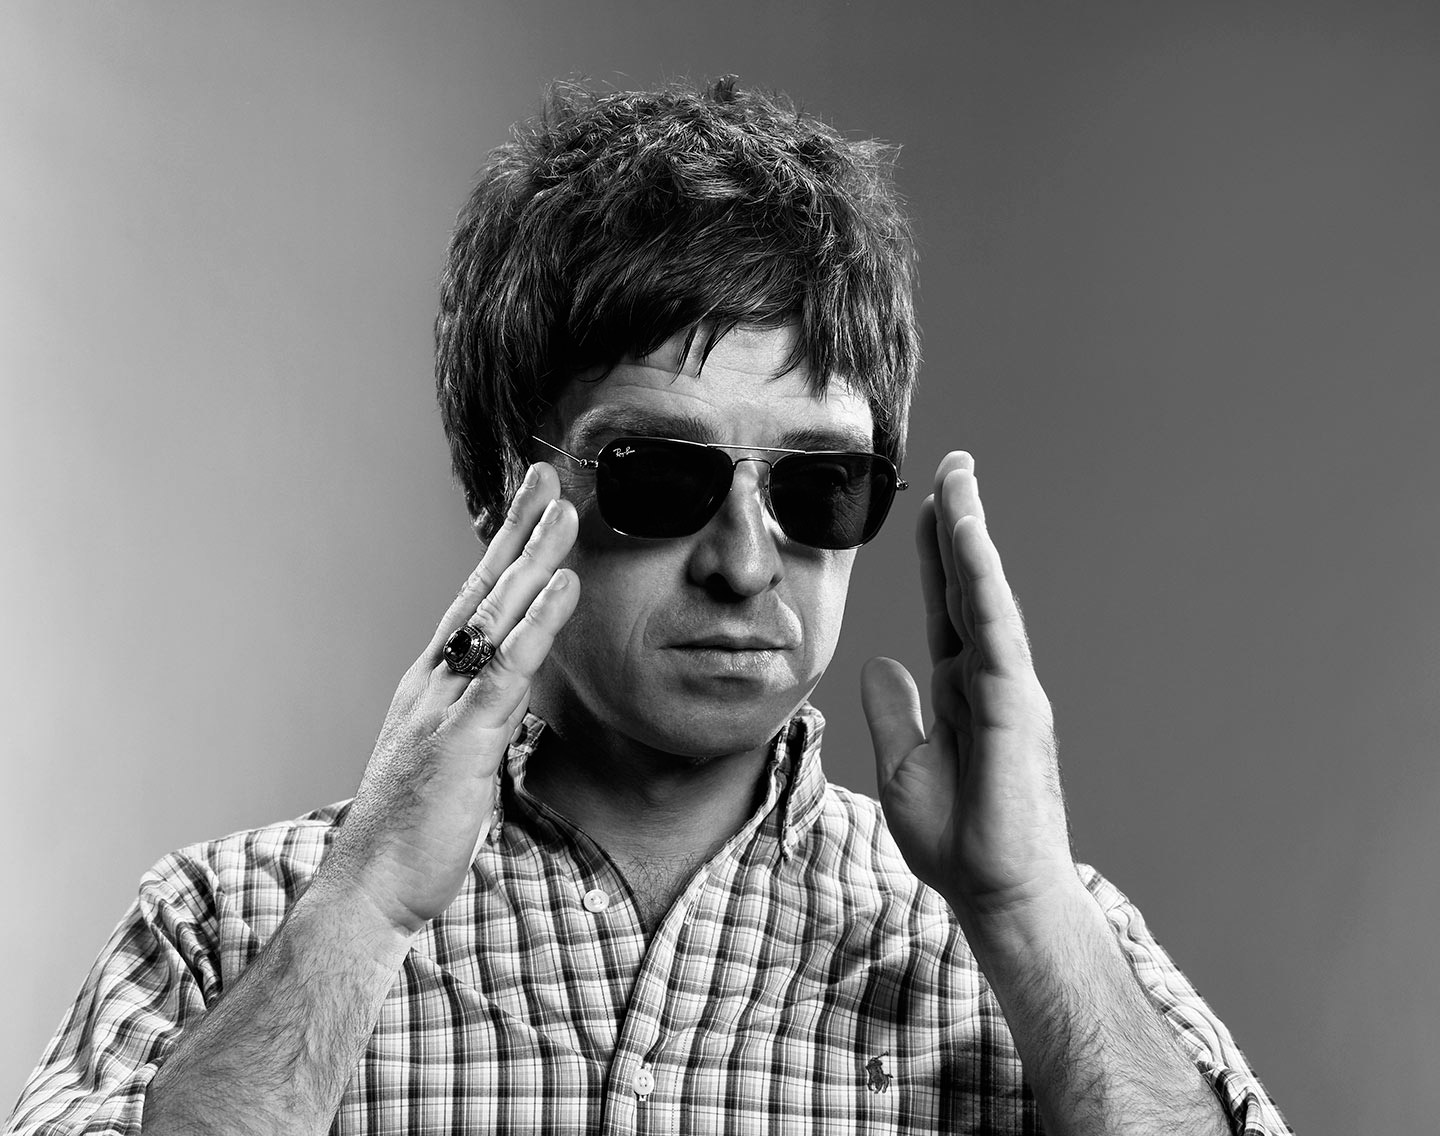 Noel Gallagher's quote #2